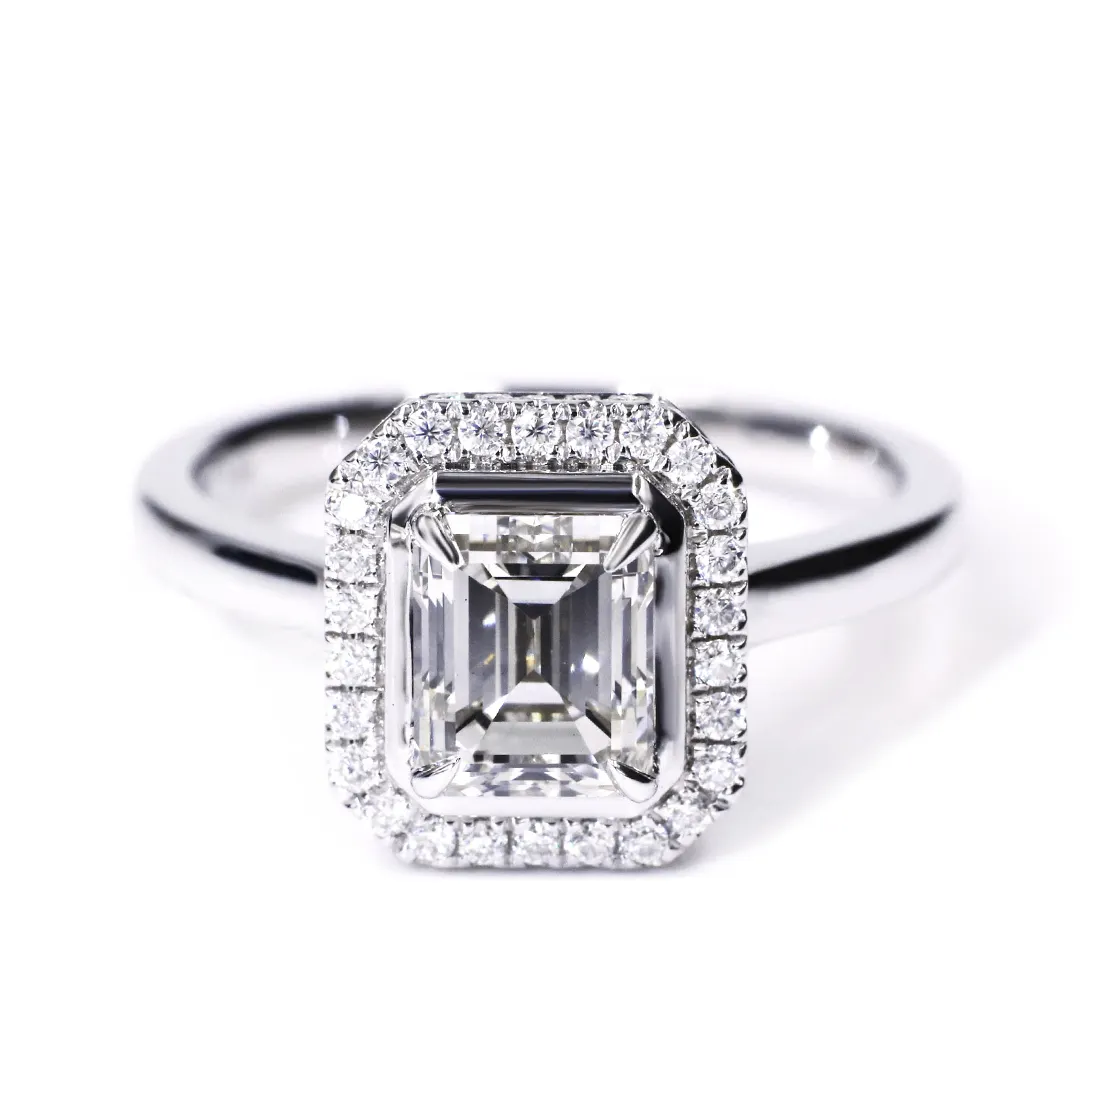 Yadis gems 1.62ct H VS2 emerald cut lab grown diamond cvd with 14k solid white gold and halo fashion jewelry ring instock